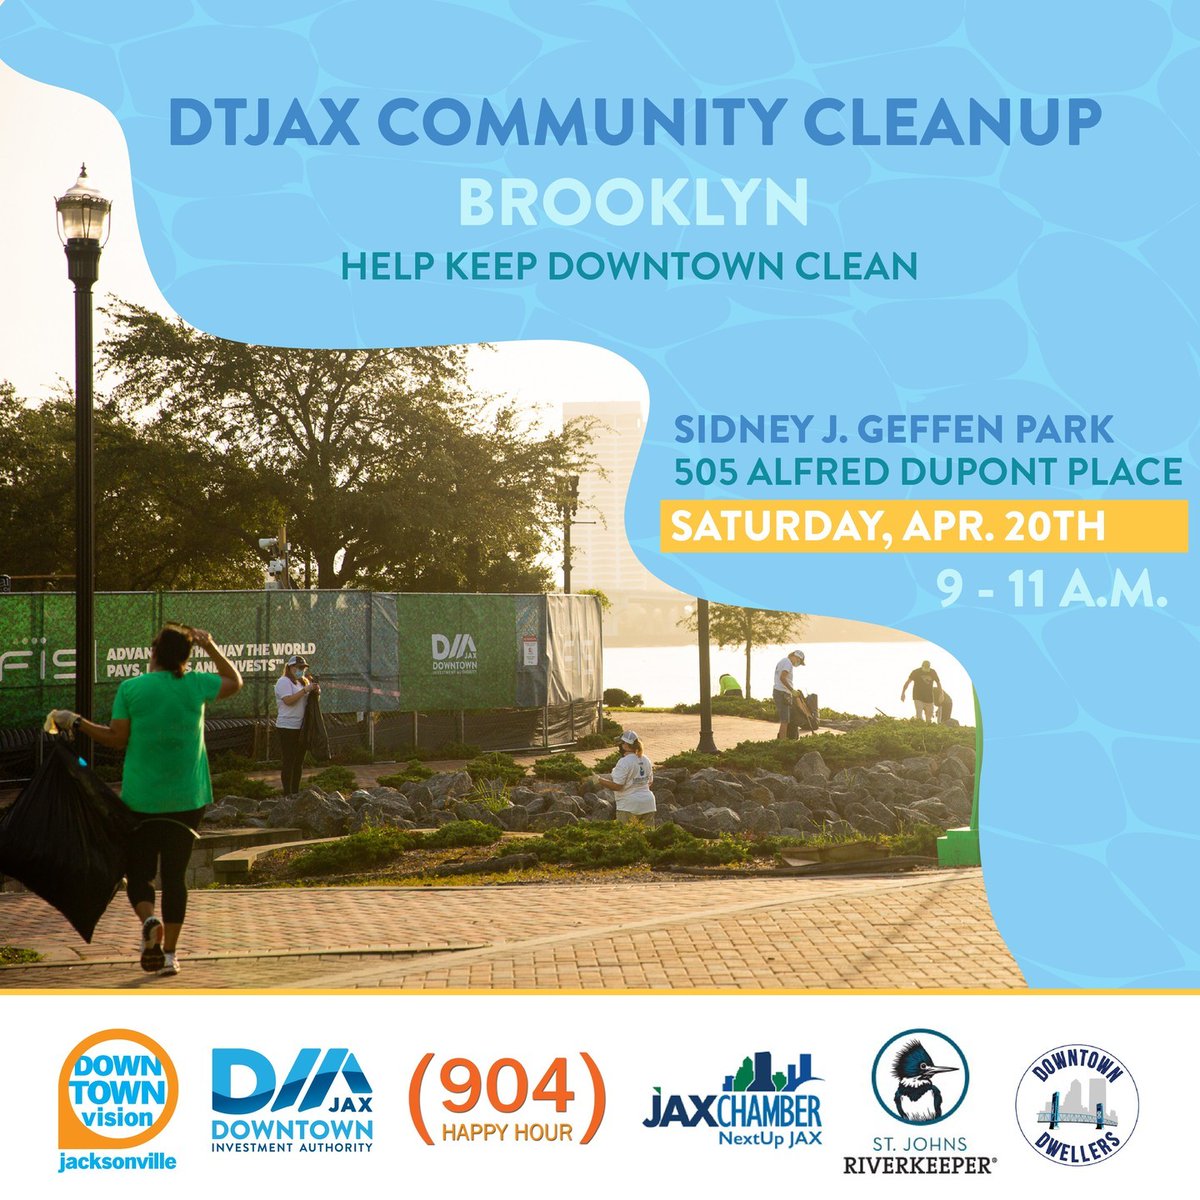 This Saturday! Join us on Saturday, April 20th for the Quarterly Downtown Cleanup in the Brooklyn neighborhood 🌷☀️ 🌱 When: April 20th @ 9-11 a.m. 🌱 Where: Sidney J. Gefen Park | 505 Alfred duPont Place Learn more at dtjax.com/events